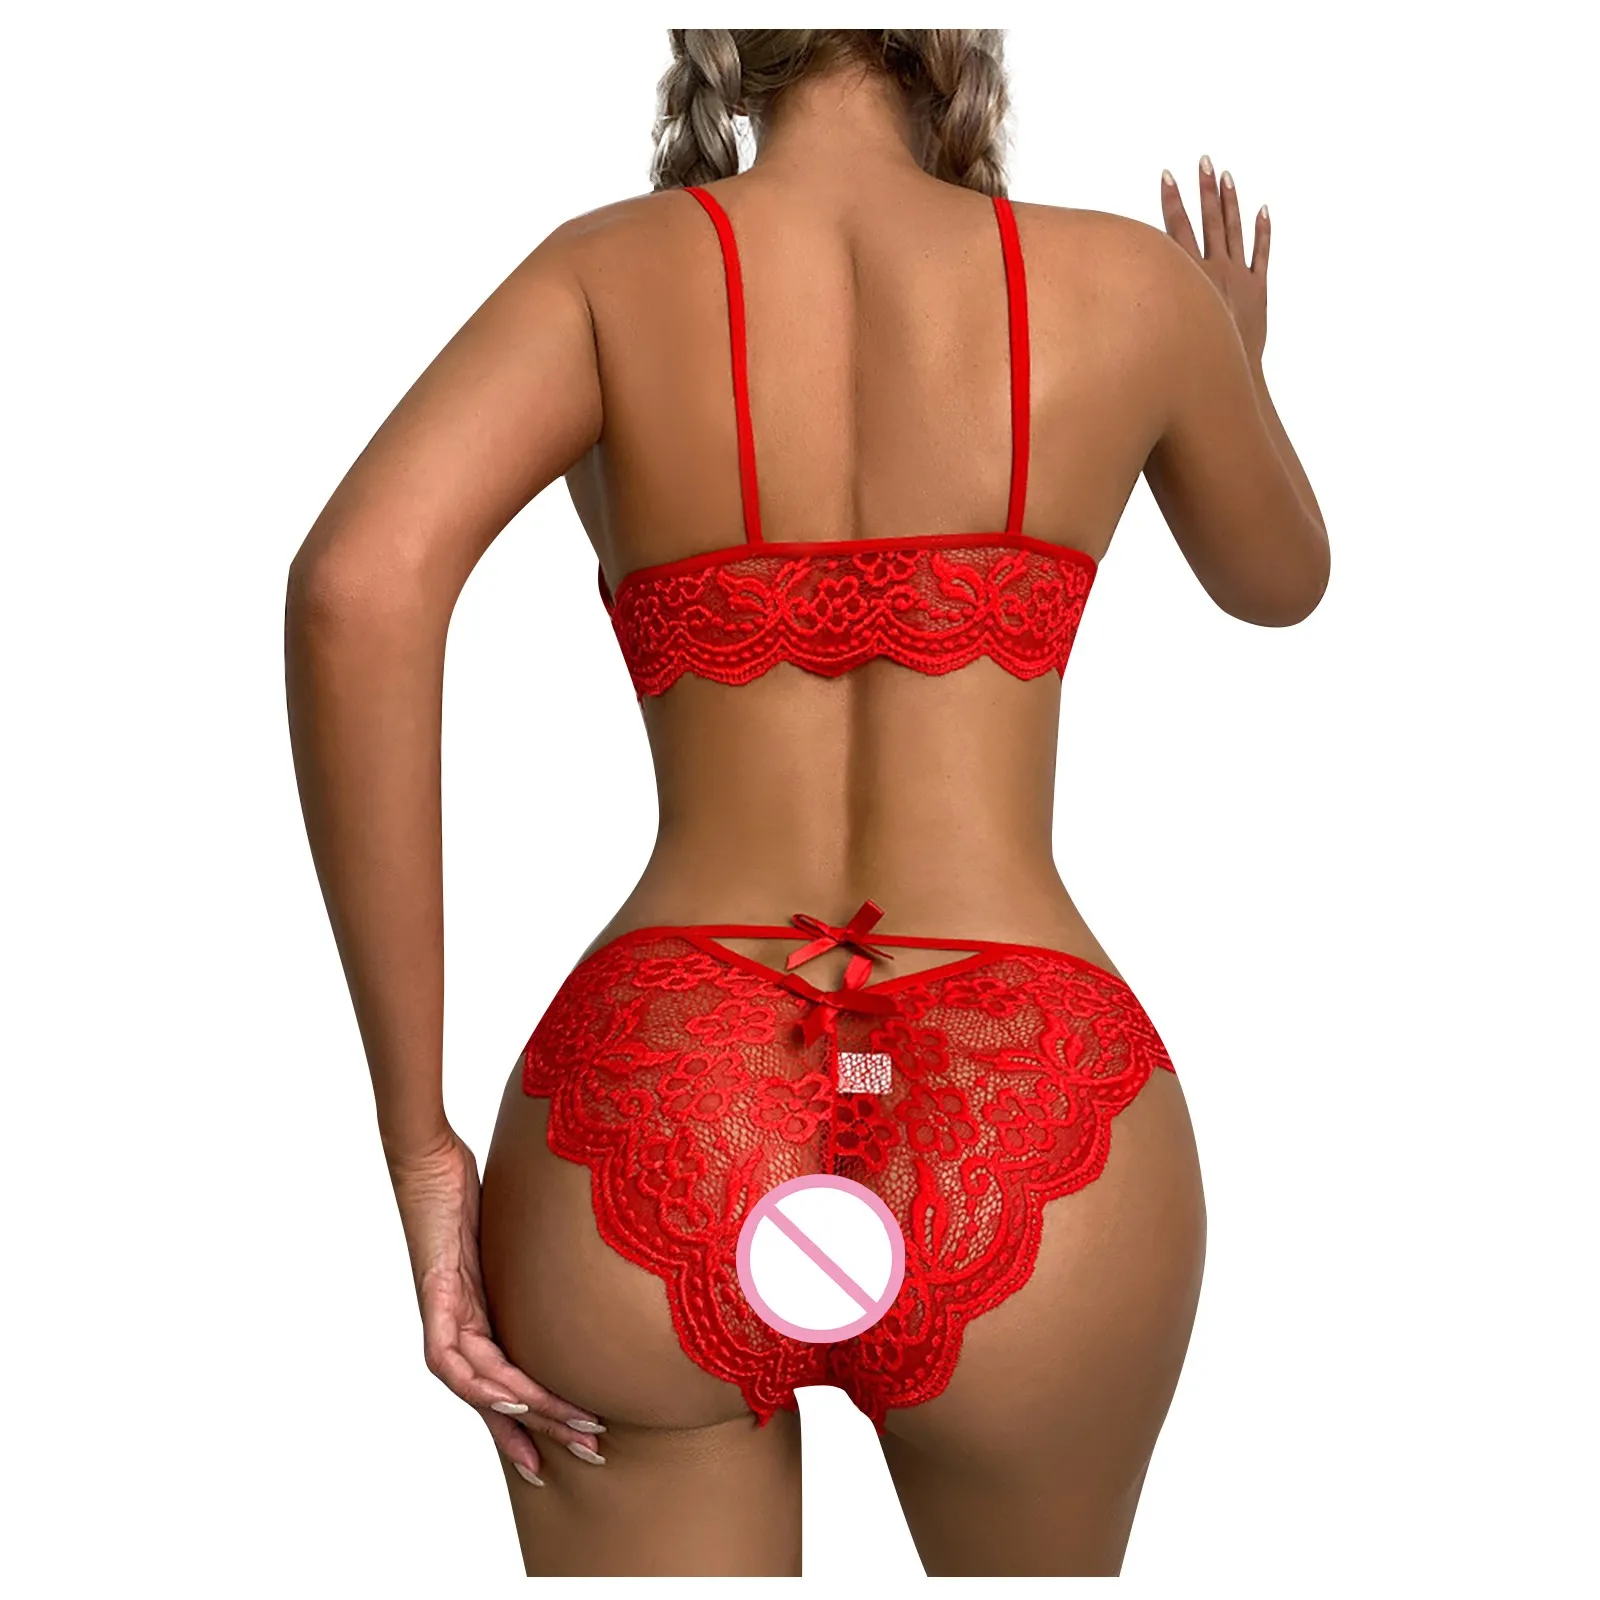 womens lingerie sets Two-piece Suit Ladies Strap Cutout Teddy Sexy Sensual Embroidery Gauze Lingerie Women Hollow See-through Underwear Set Erotic bra and underwear set